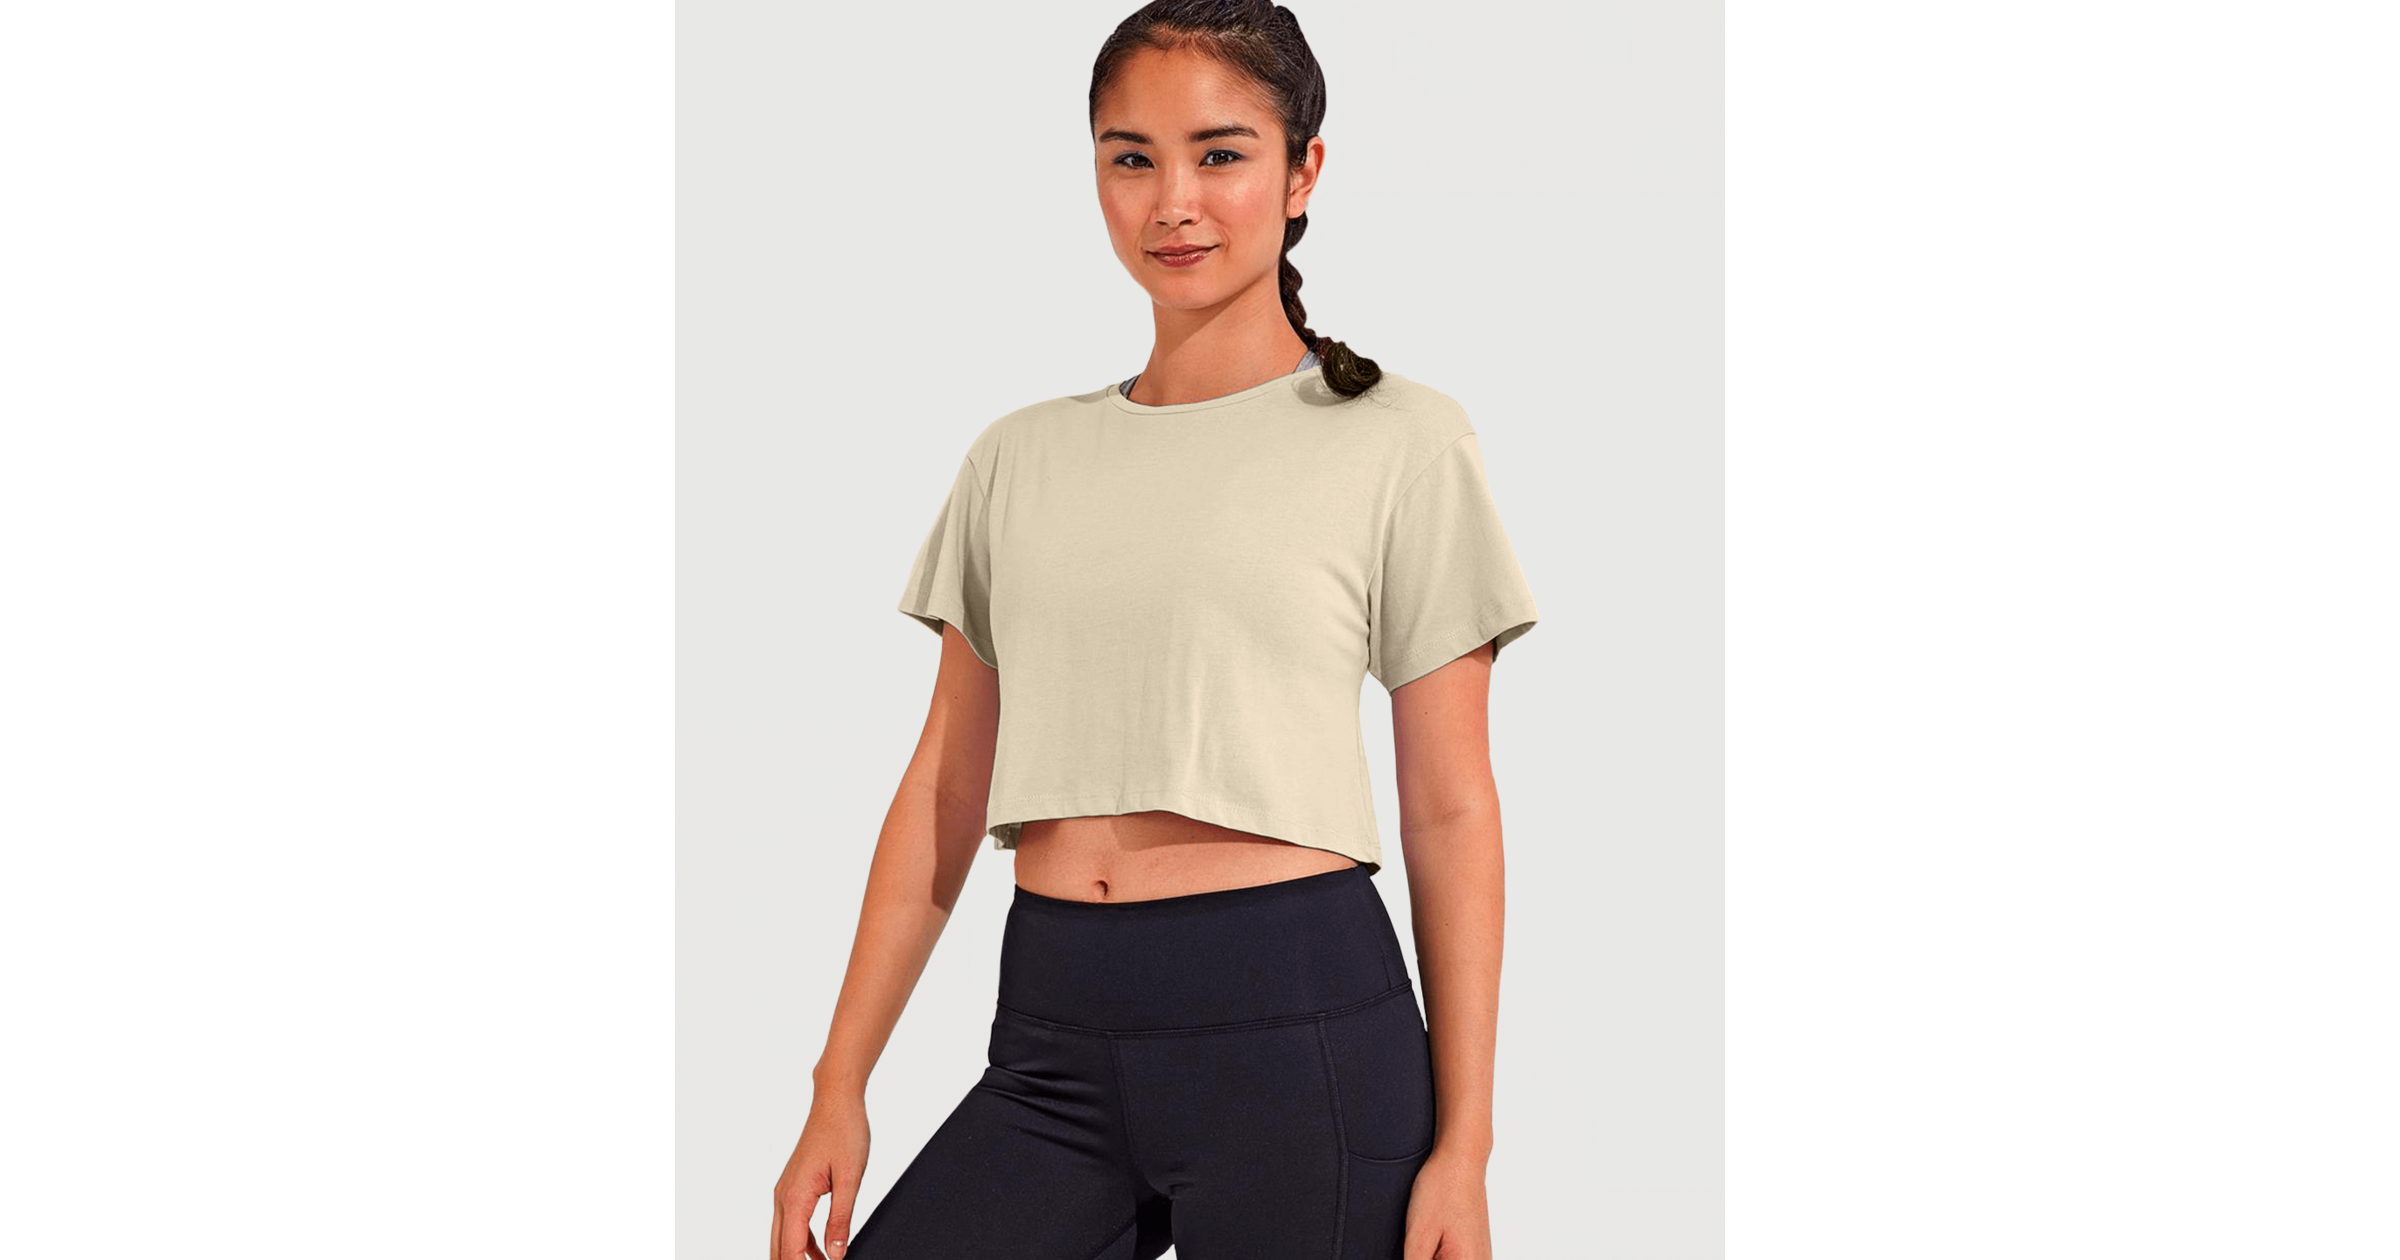 https://www.inkthreadable.co.uk/images/pictures/01-2022/2022-homepage-banners/2022-products/2022-aug-new-products/women-s-tridri-crop-top-(1200x630-ffffff).png?v=3f6ed5bf